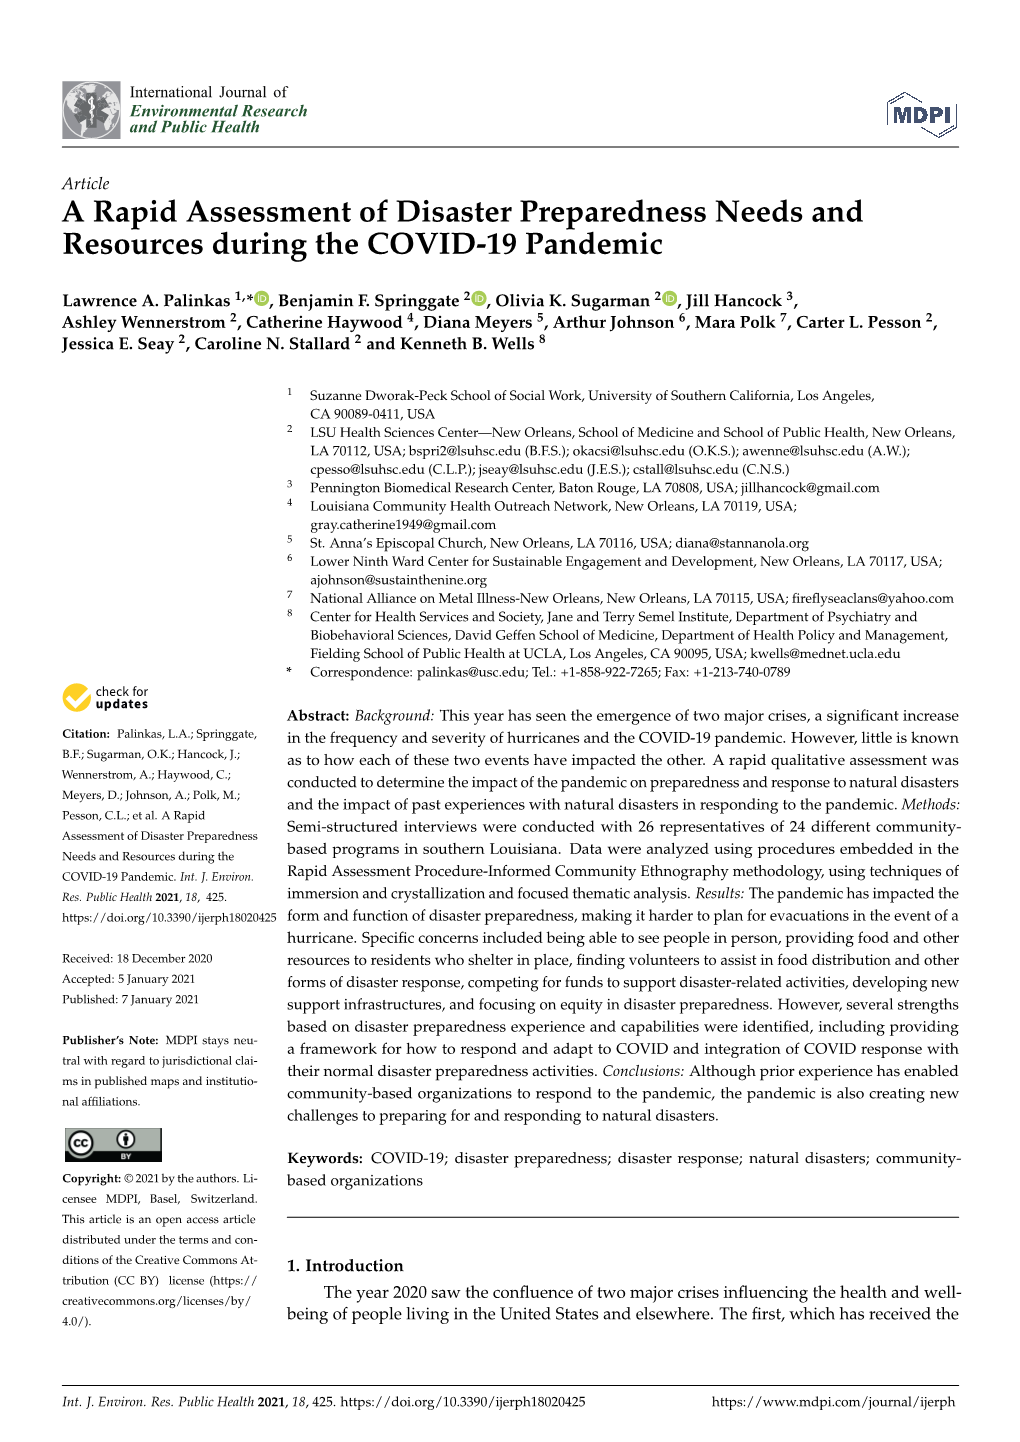 A Rapid Assessment of Disaster Preparedness Needs and Resources During the COVID-19 Pandemic